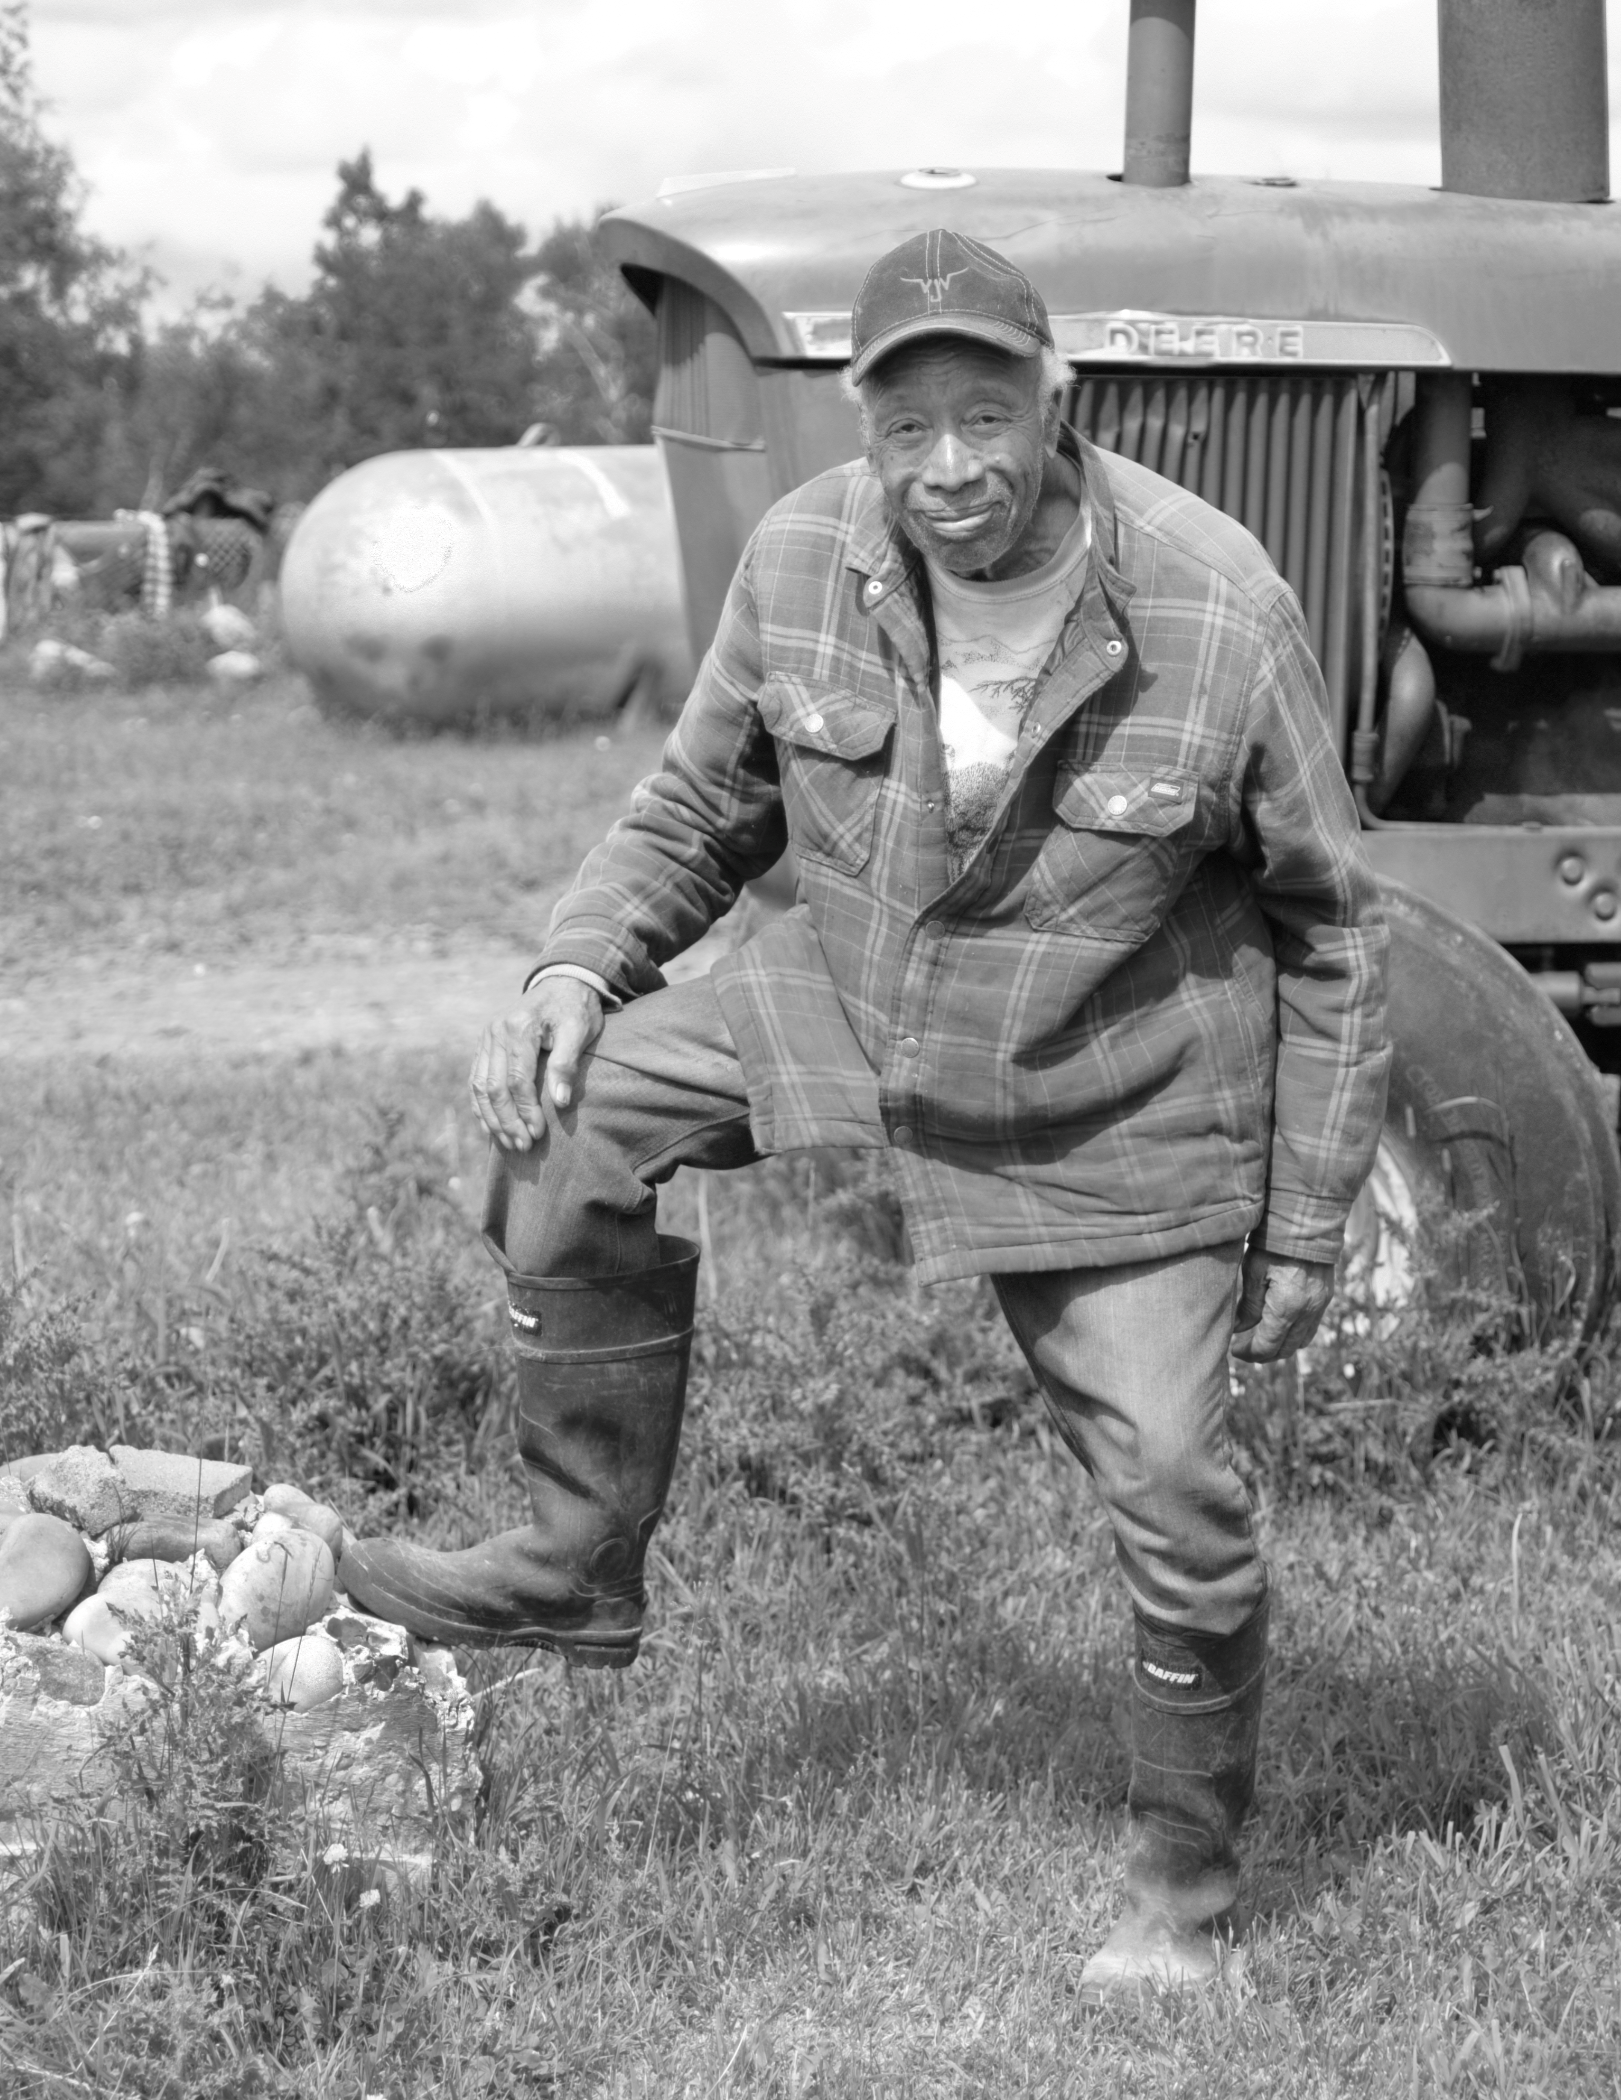 A Black person wearing rubber boots and a ball cap stands with one foot on a rock. A tractor and gas tank are visible in the background.